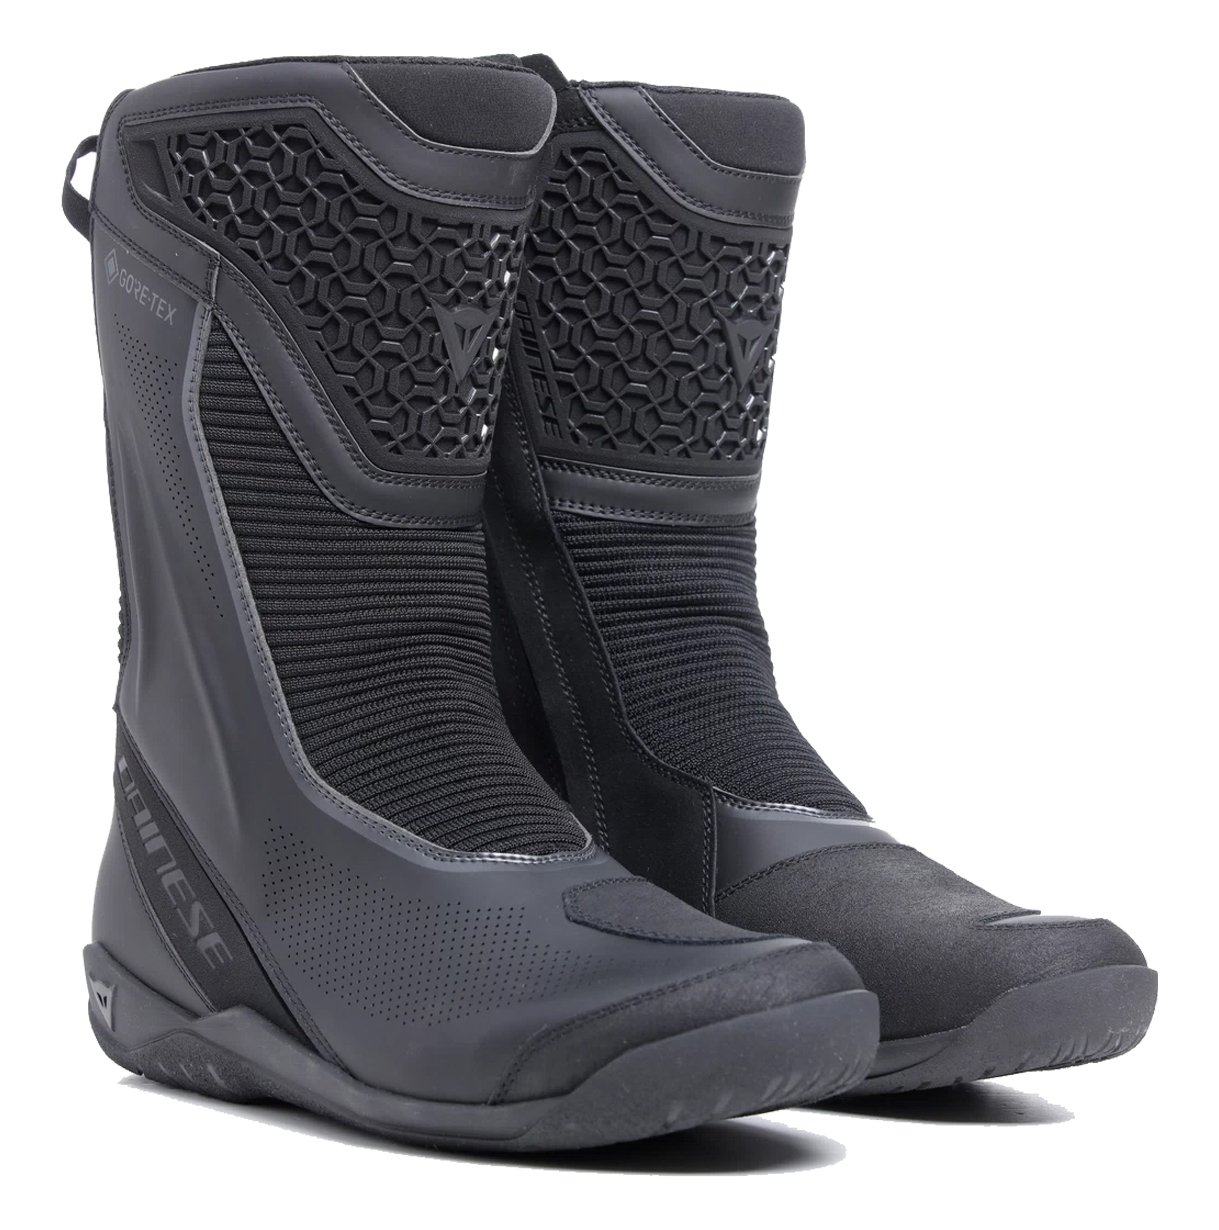 Image of Dainese Freeland 2 Gore-Tex Boots Black Size 41 EN